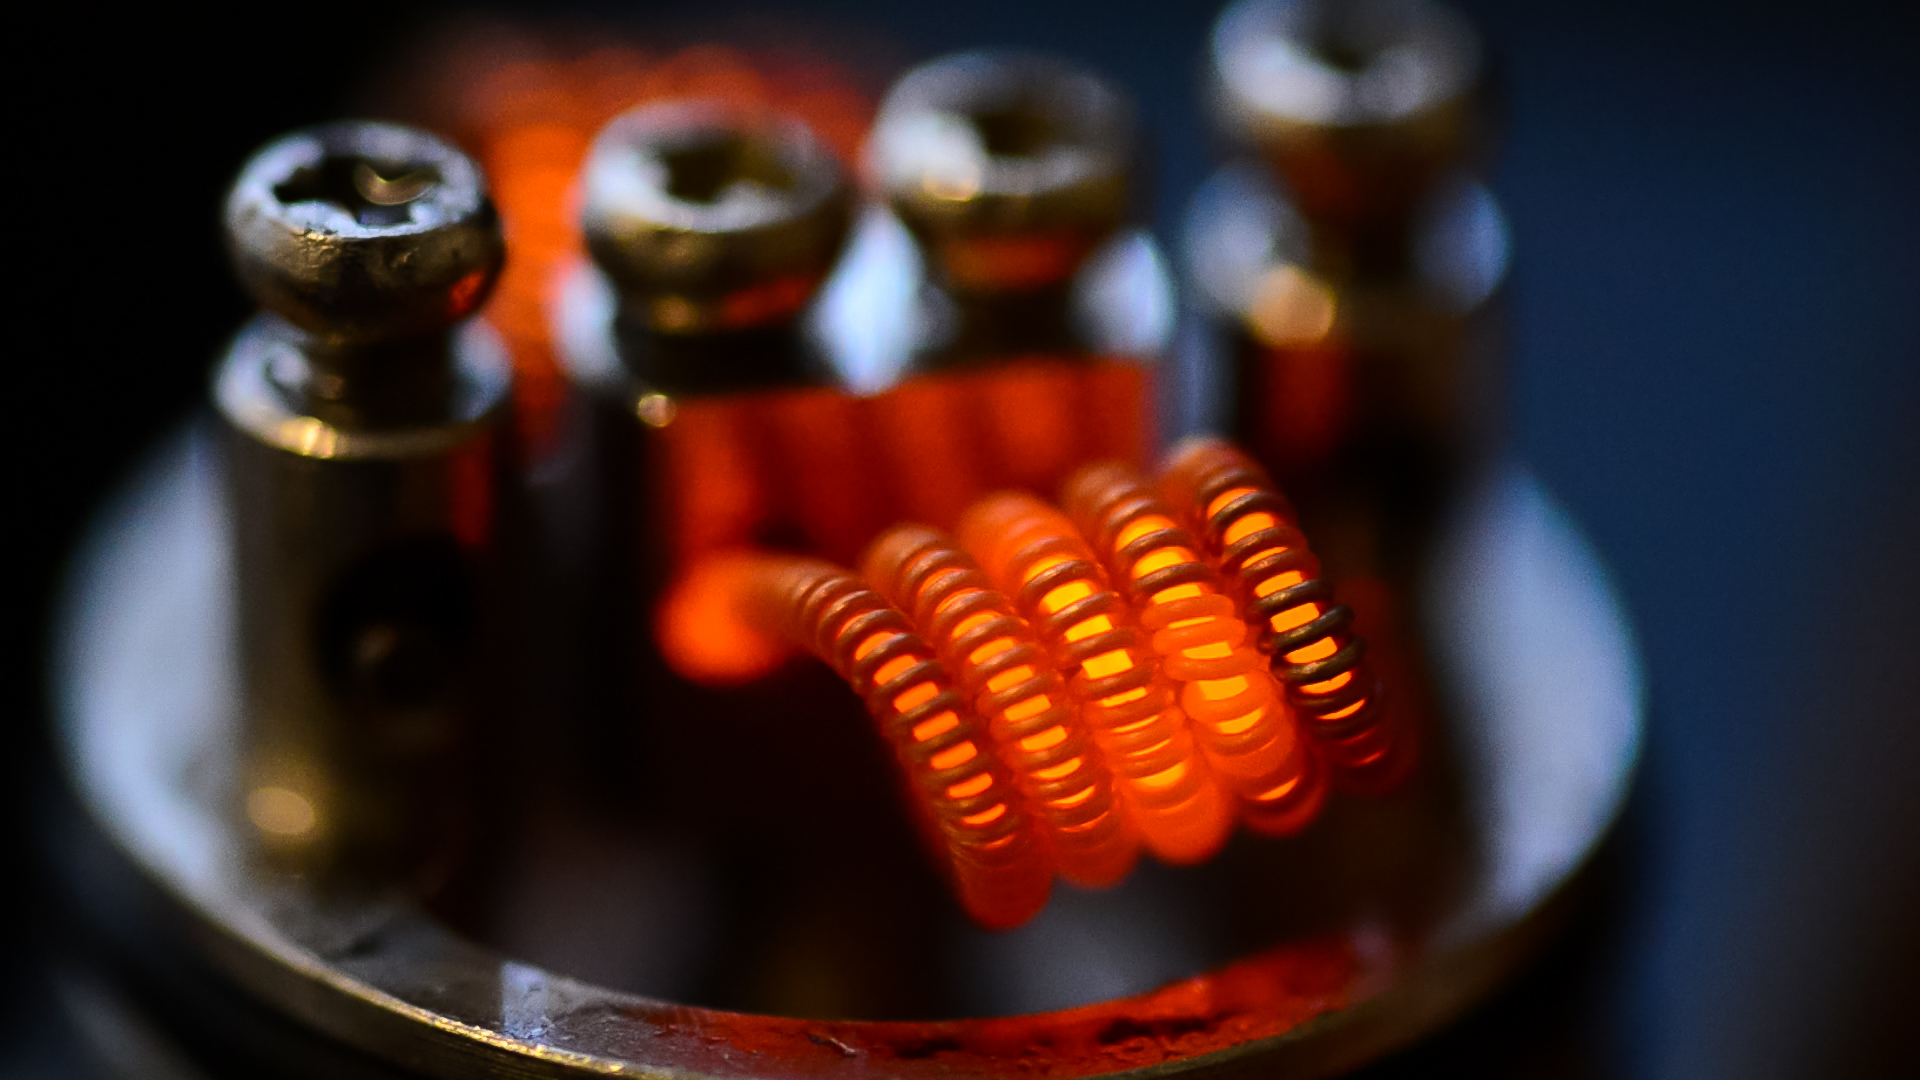 Glowing Clapton Coil On A Four Post Rda Mang Vapor